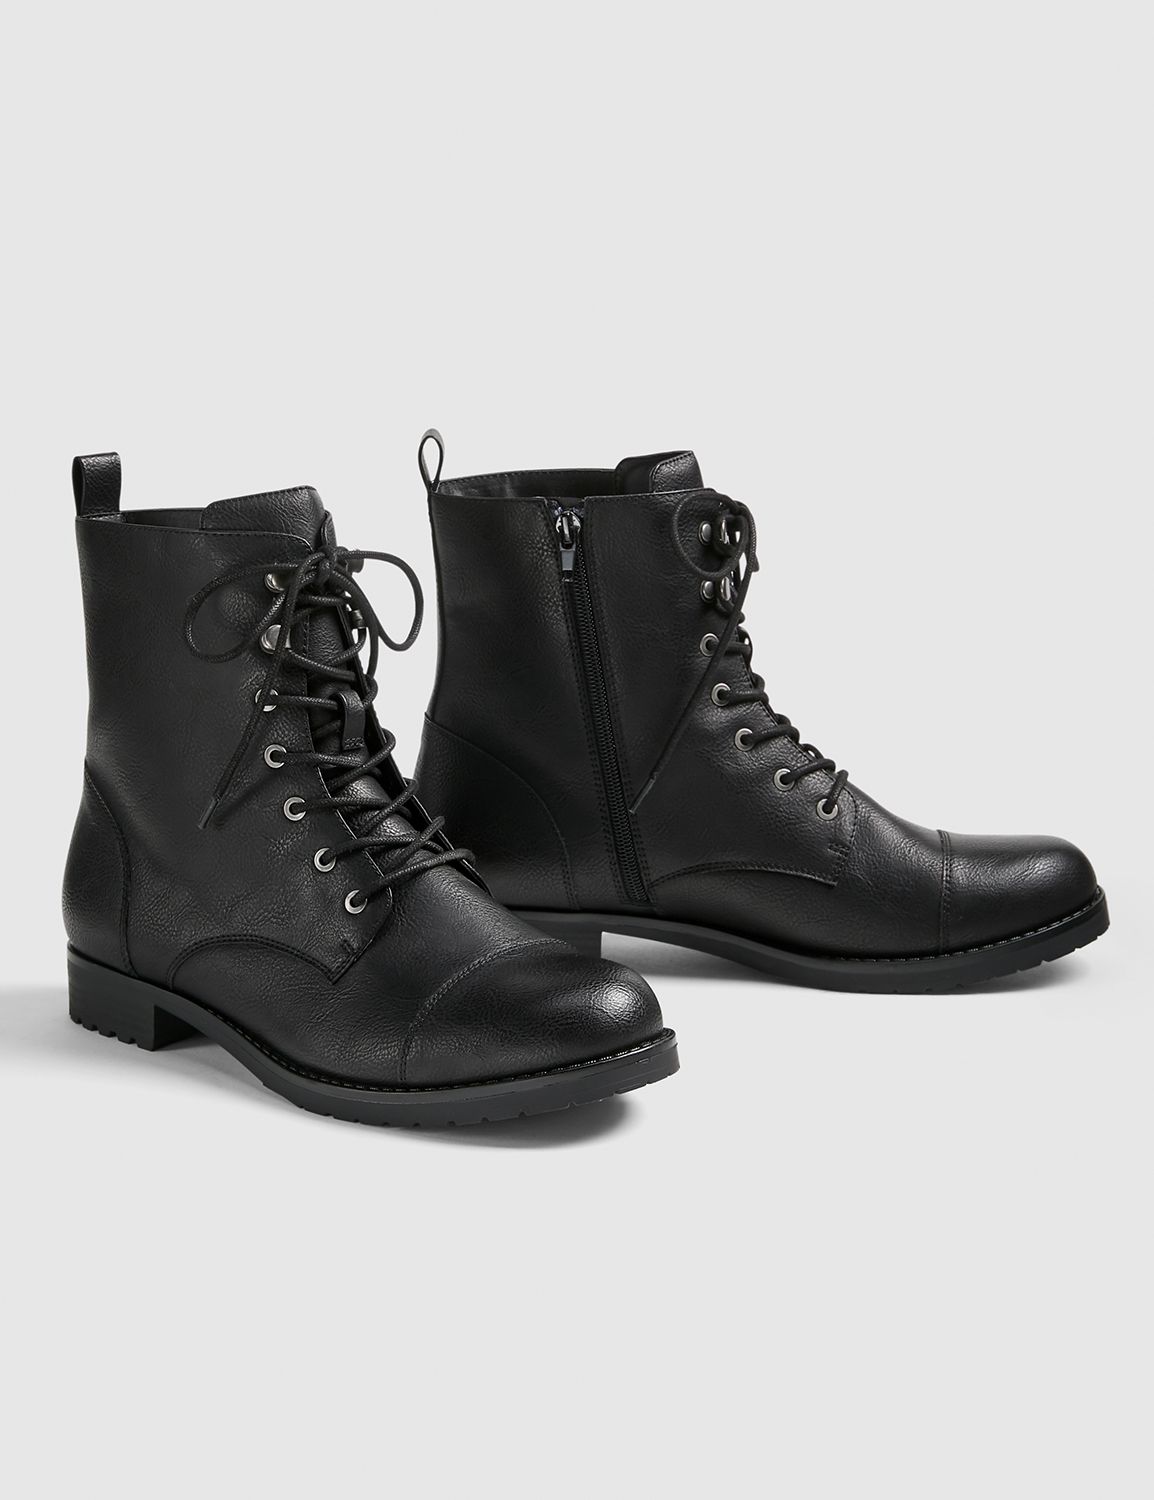 womens fashion boots wide width